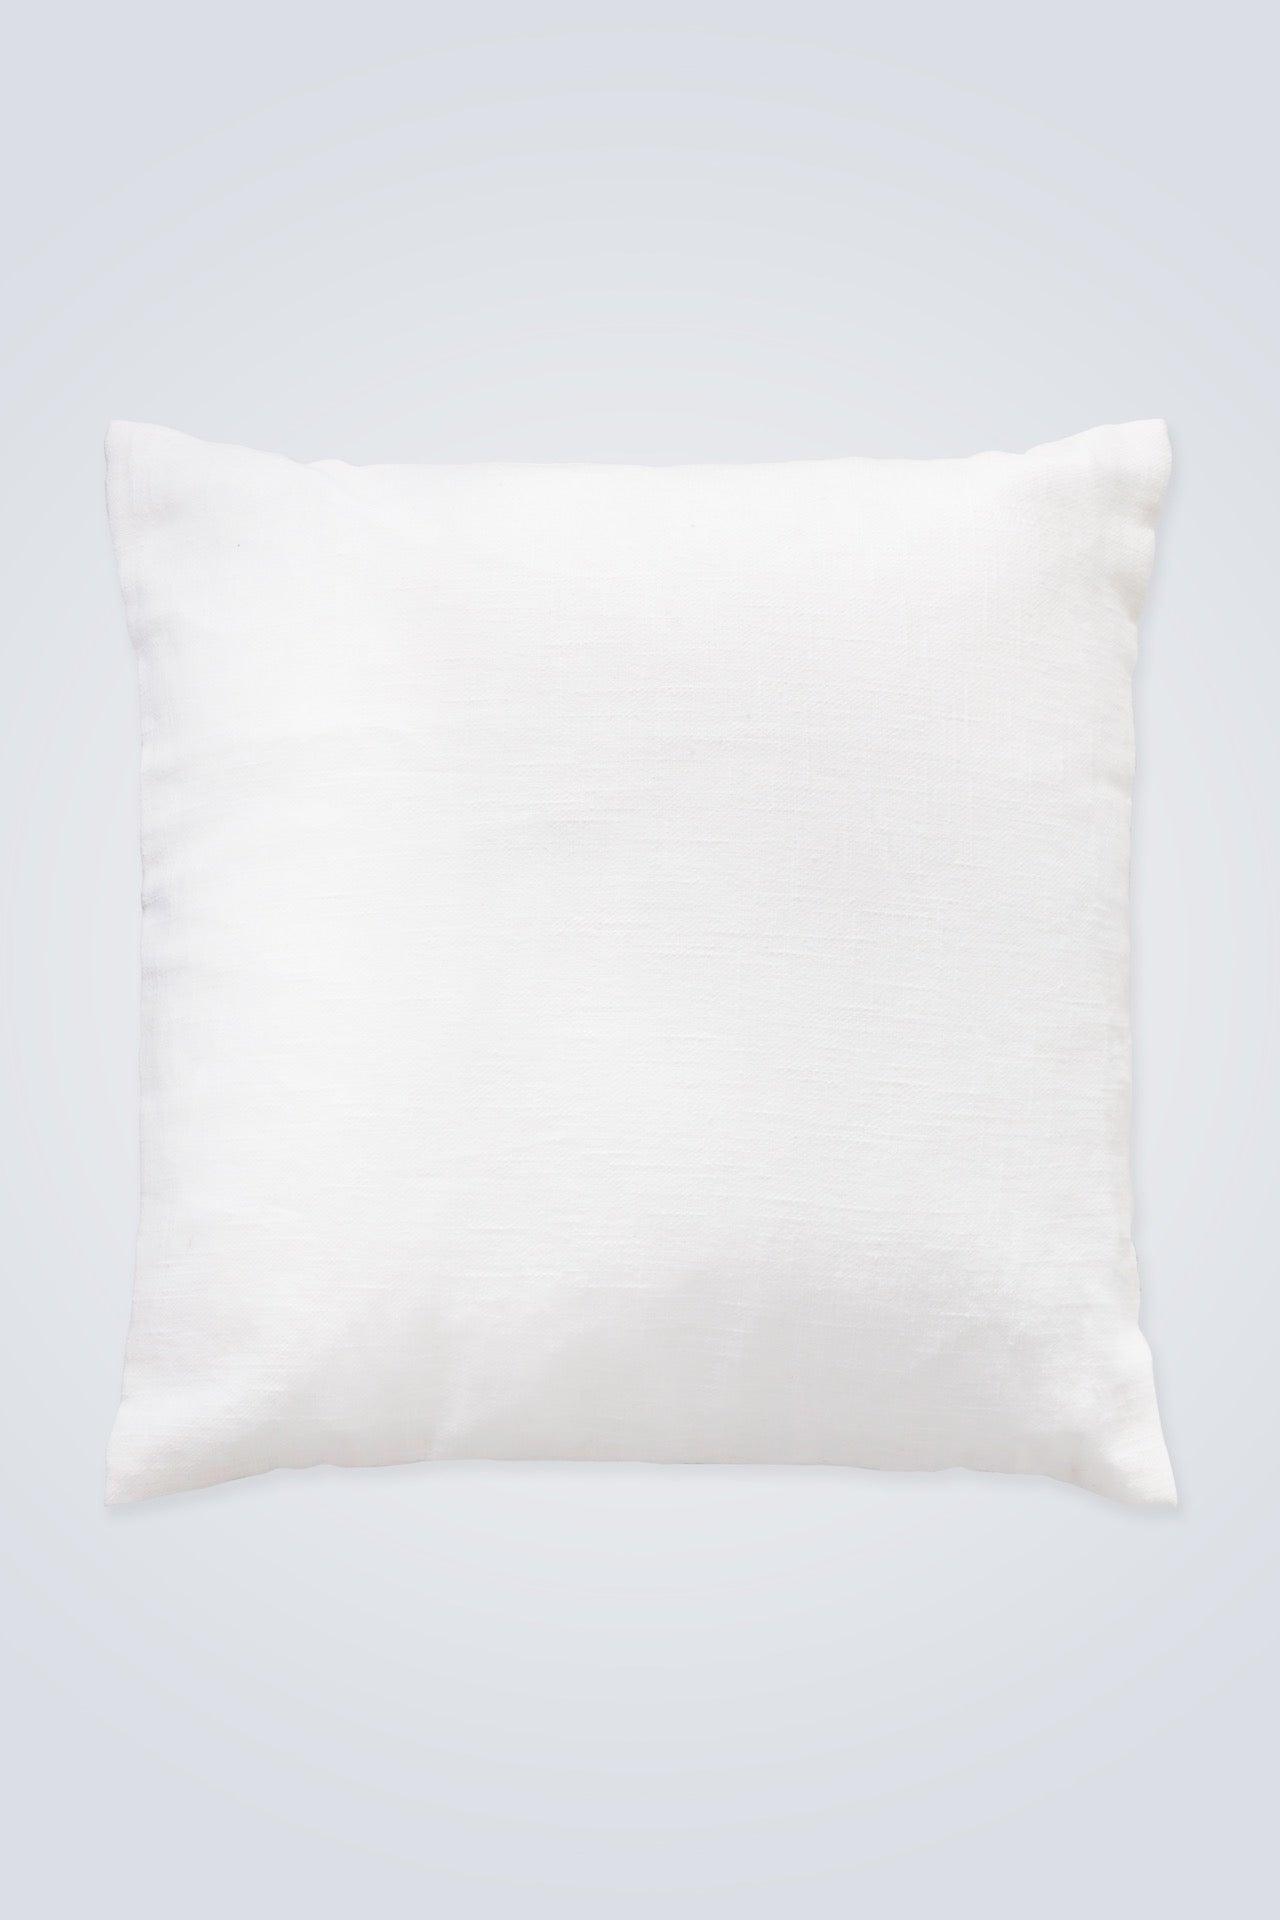 Ramie Square Throw Pillow - NOT LABELED